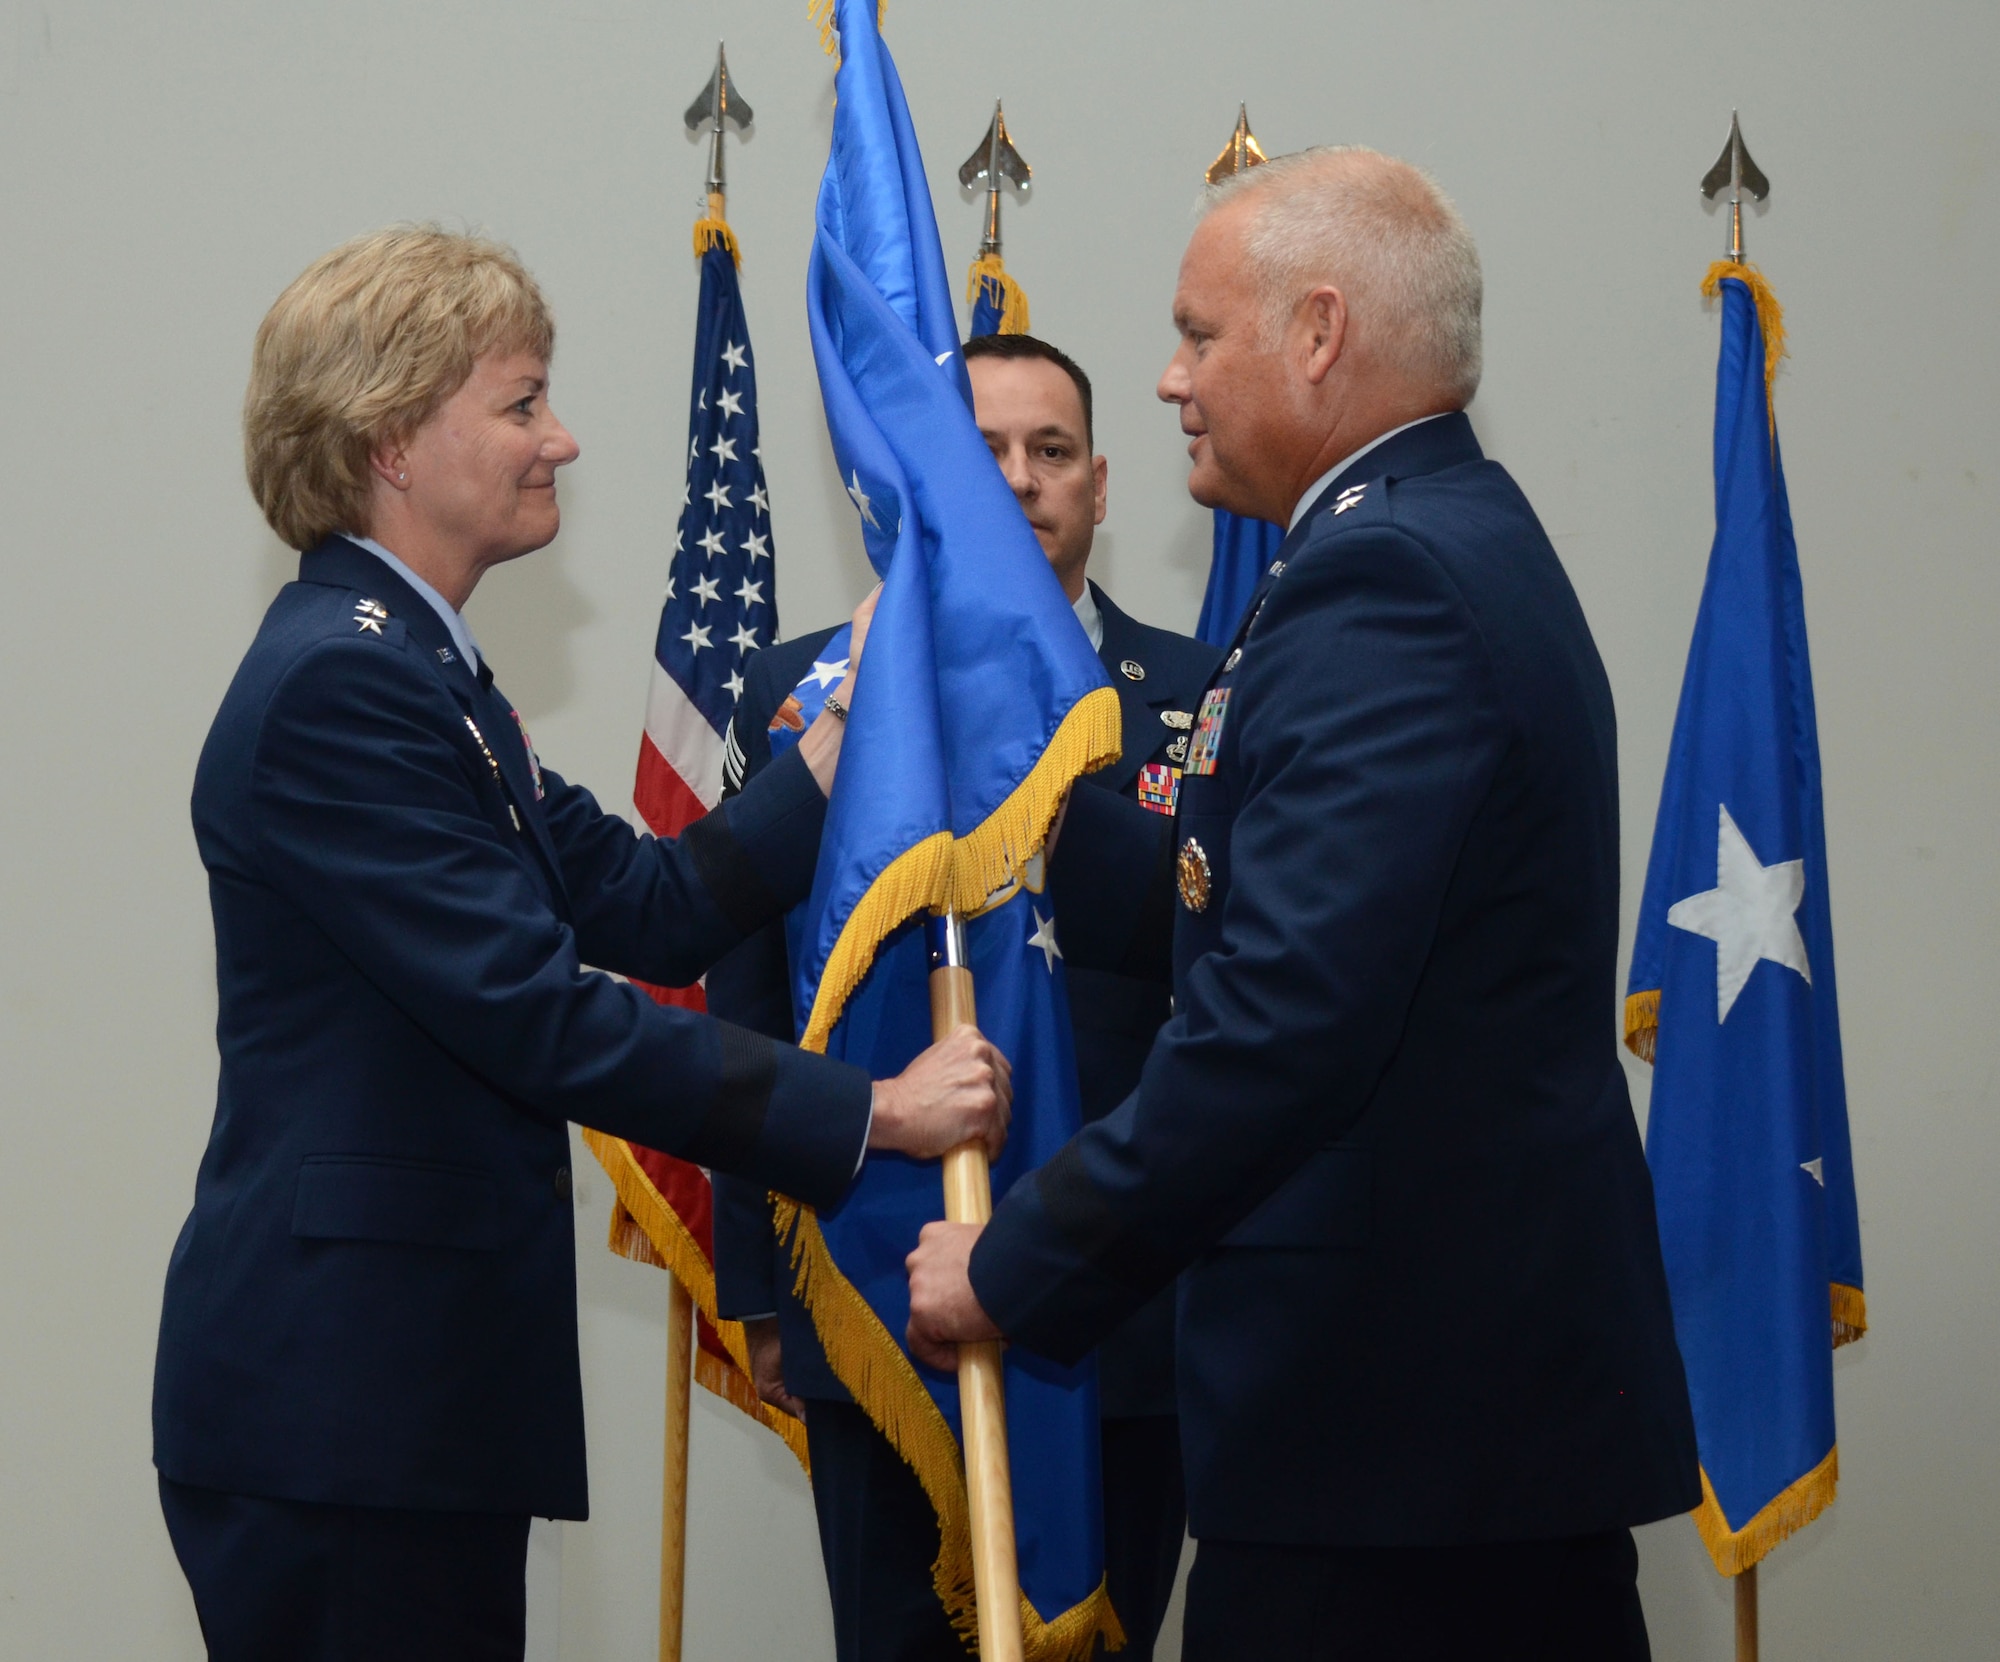 Lt. Gen. Maryanne Miller, Chief of Air Force Reserve, Commander Air Force Reserve Command, hands the guidon for the 22nd Air Force to Maj. Gen. John Stokes, giving him command of the unit during a change of command ceremony in Atlanta, Ga., on Aug. 8, 2016. Stokes assumed command of the 22n AF from Maj. Gen. Stayce Harris.(U.S. Air Force photo/Don Peek)